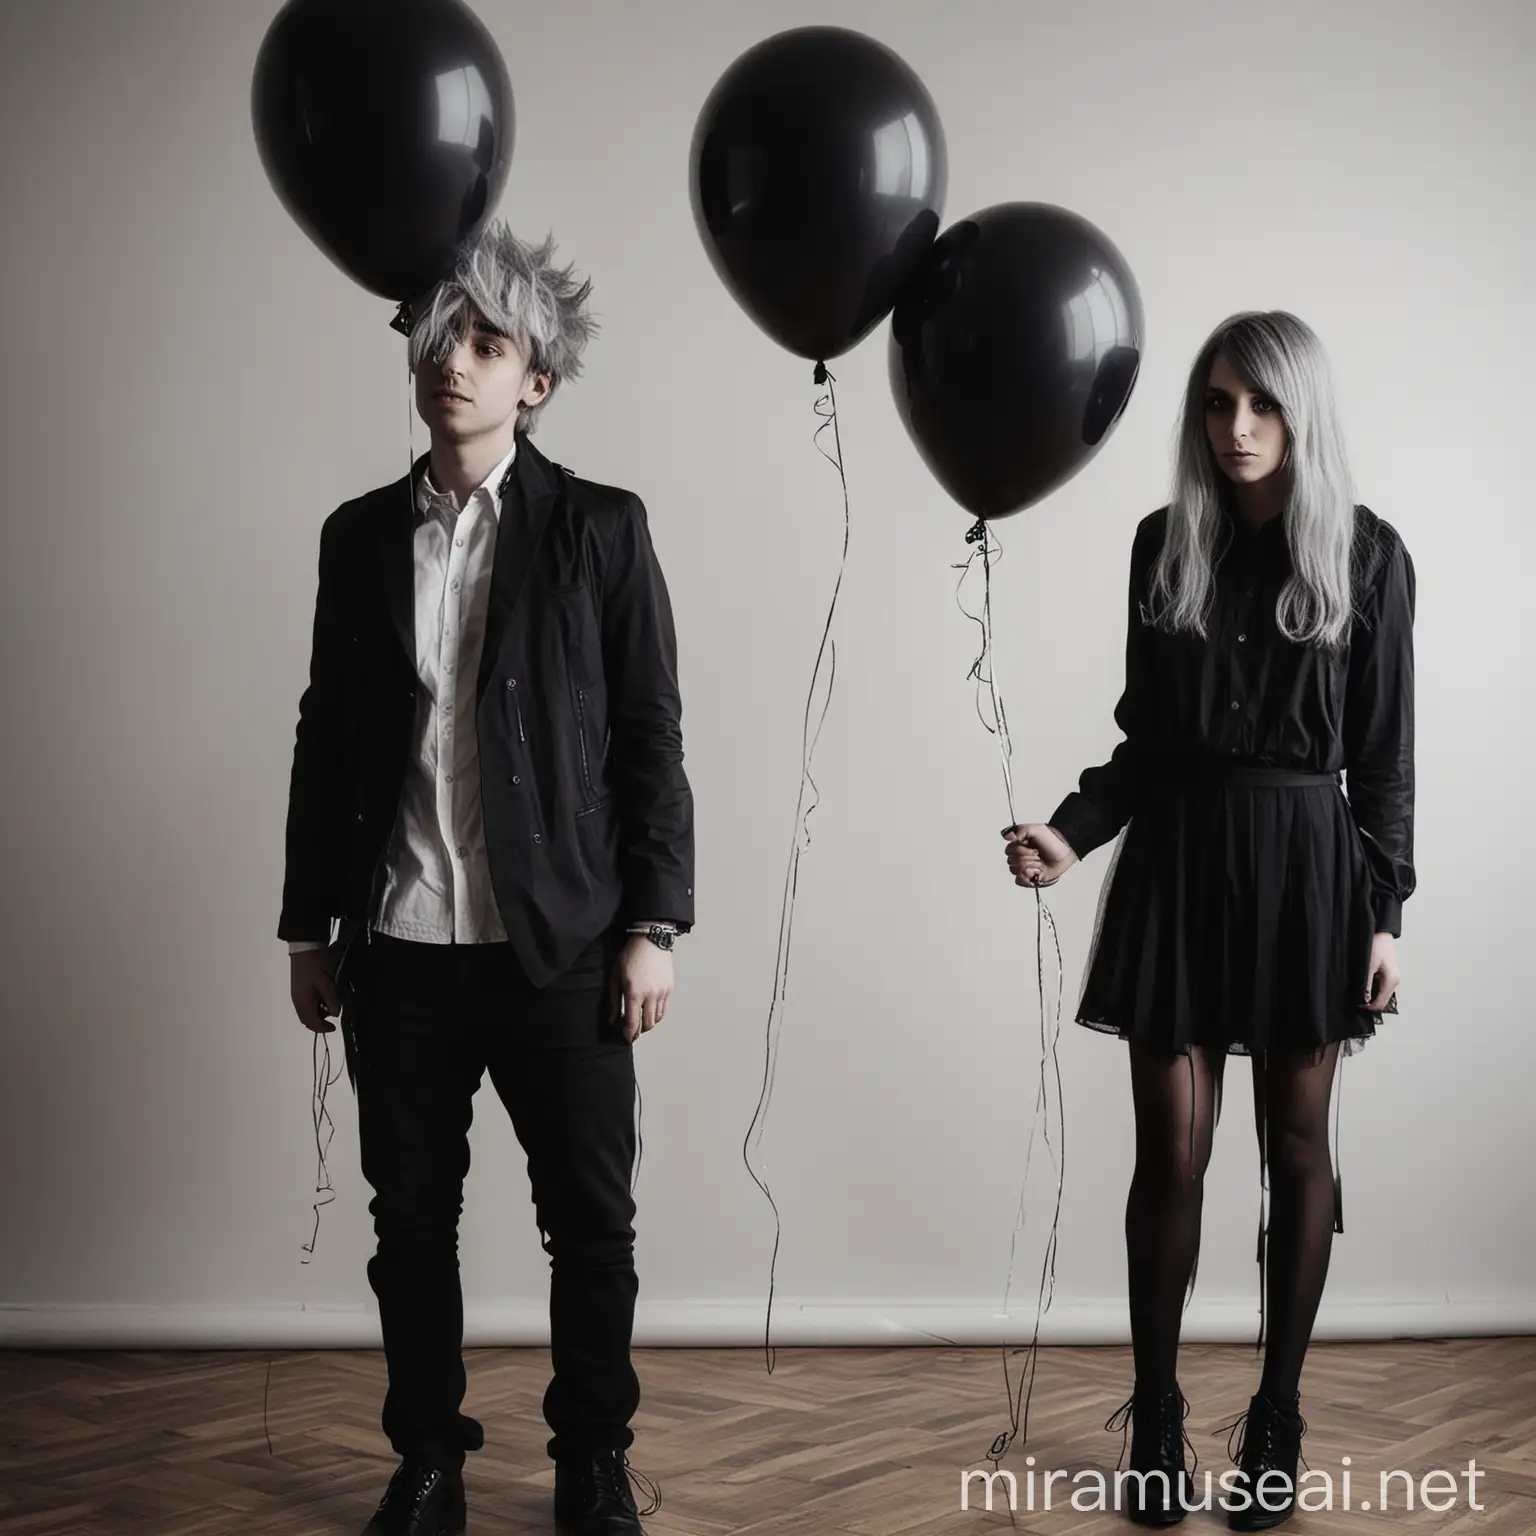 Dark Pop Band with Balloons Performing Live Concert